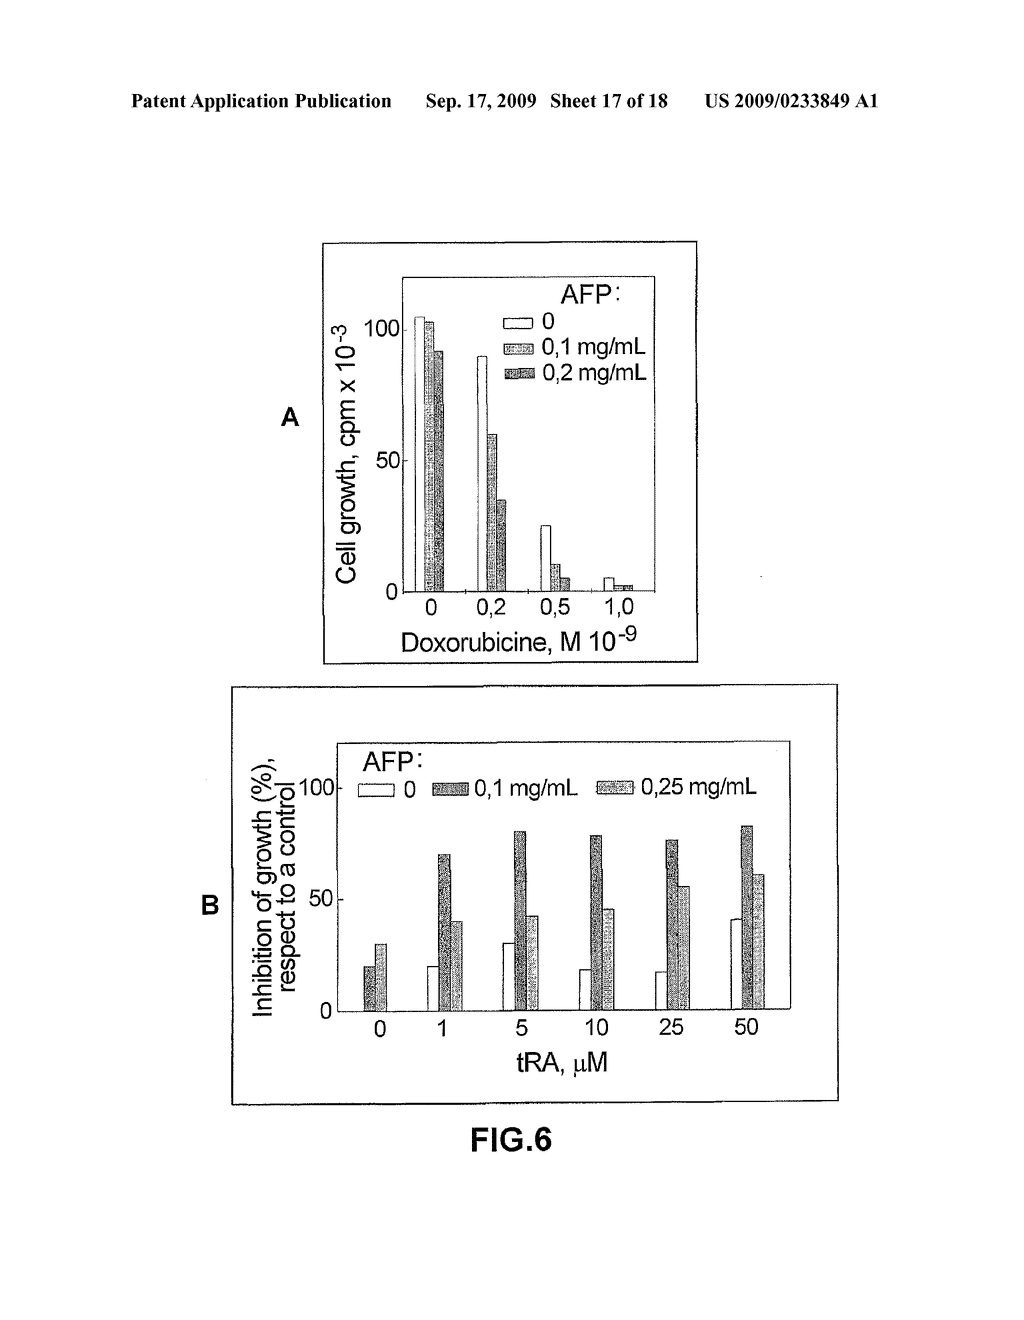 Recombinant Alpha-Fetoprotein, Method and Means for Preparation Thereof, Compositions on the Base Thereof and Use Thereof - diagram, schematic, and image 18